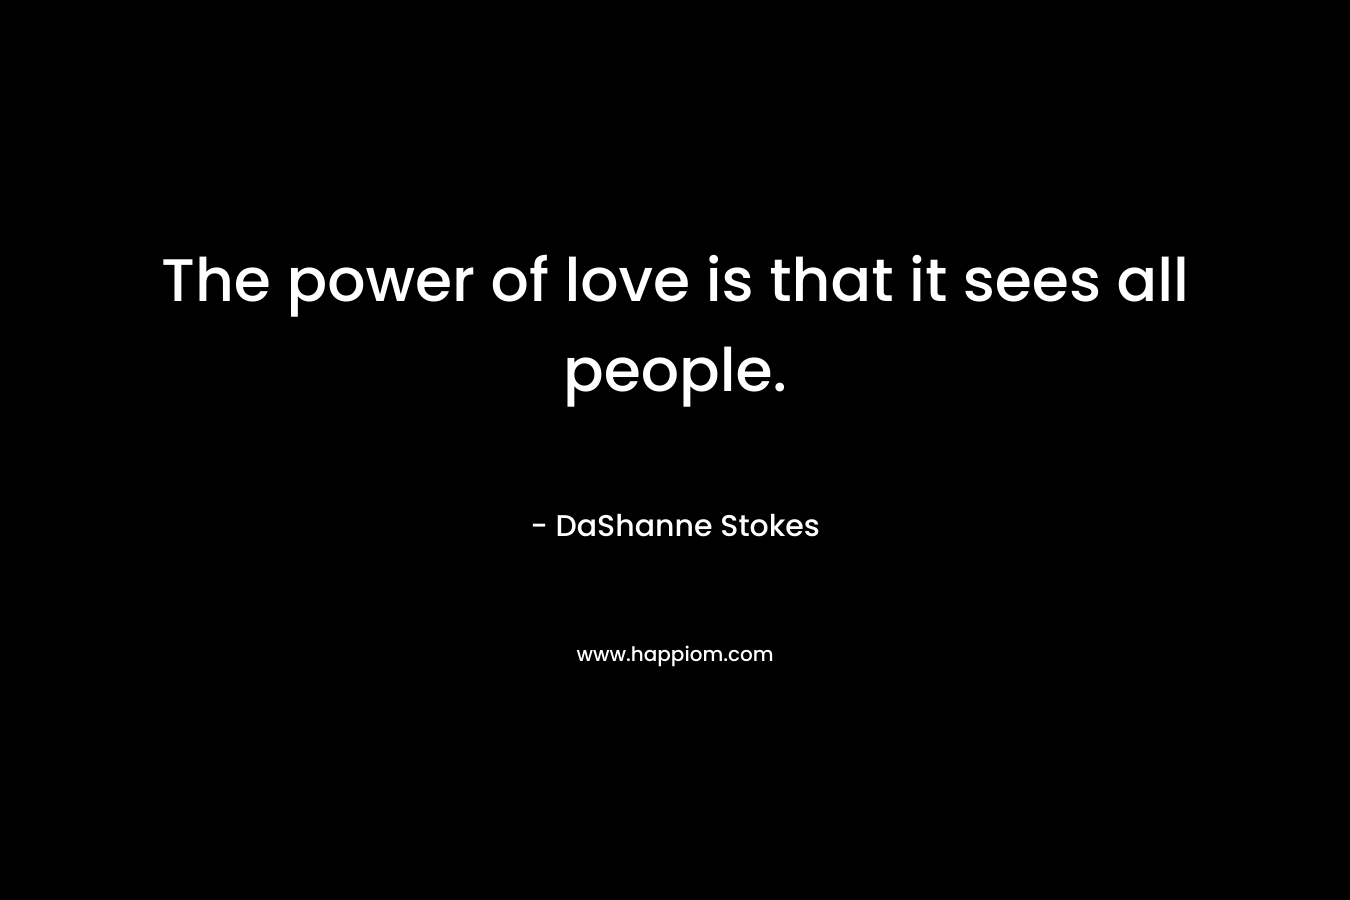 The power of love is that it sees all people.